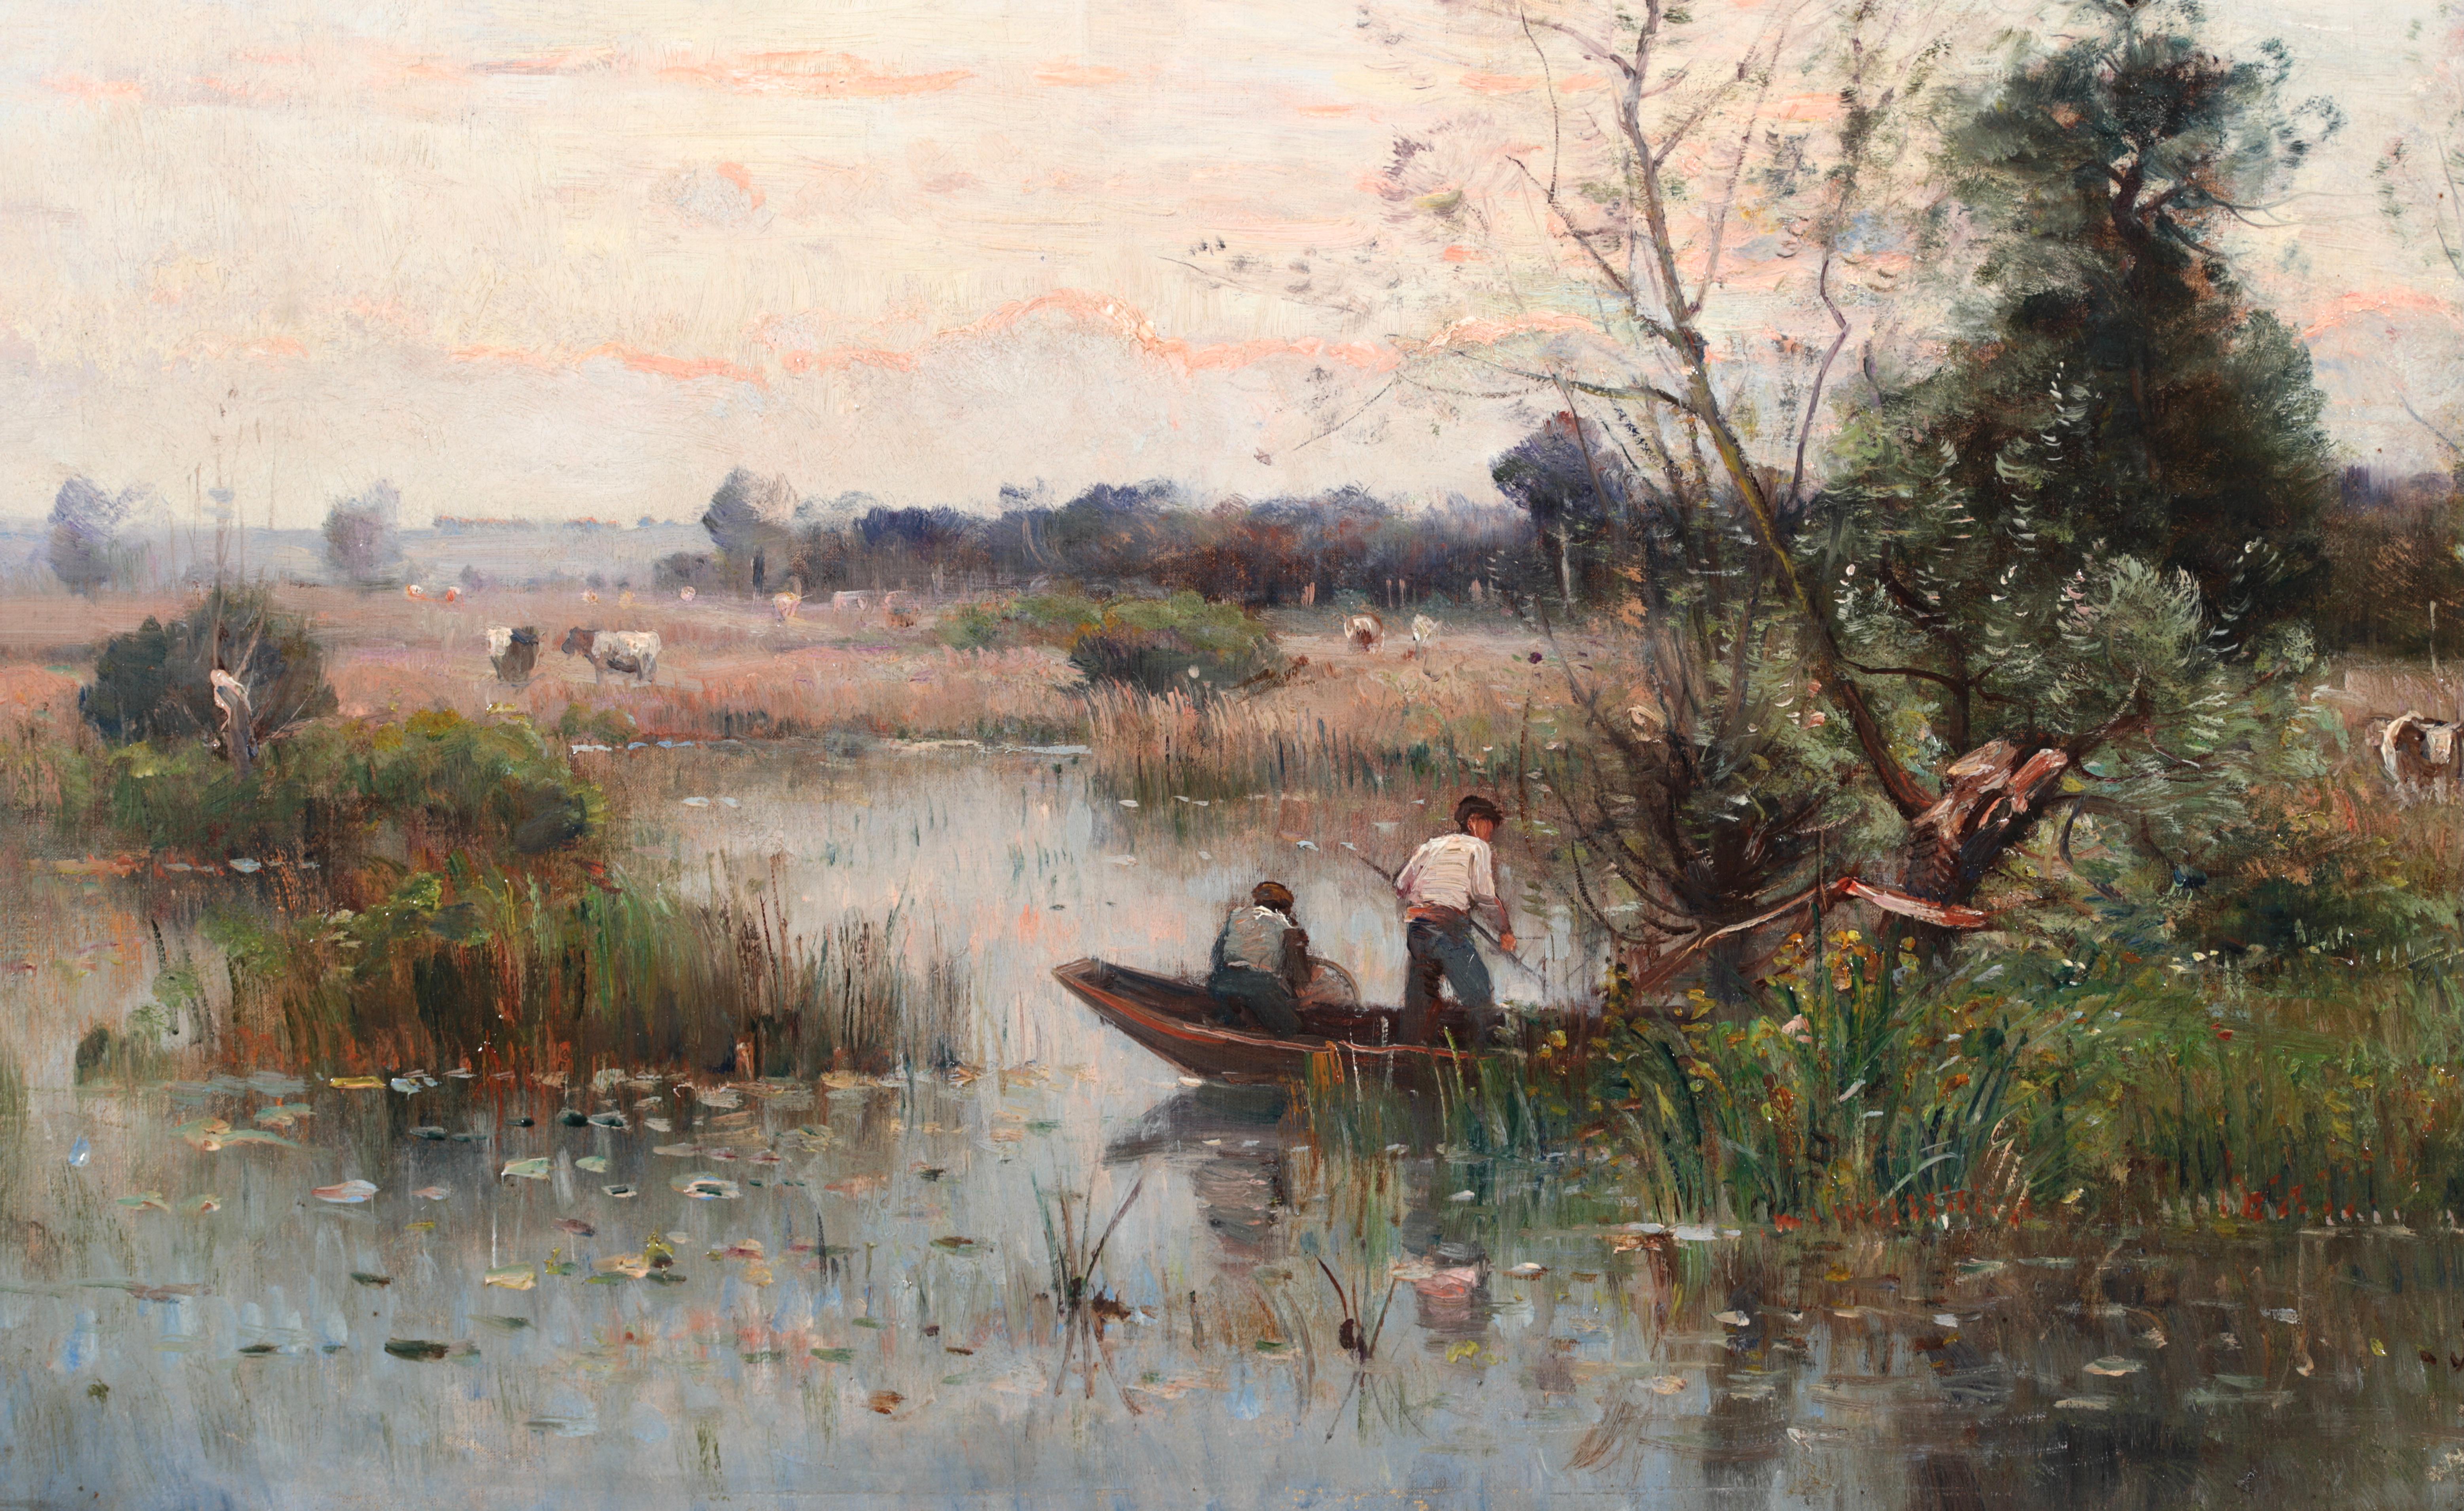 Fishing on a River - Impressionist Oil, Boat on River Landscape by Louis Japy 3